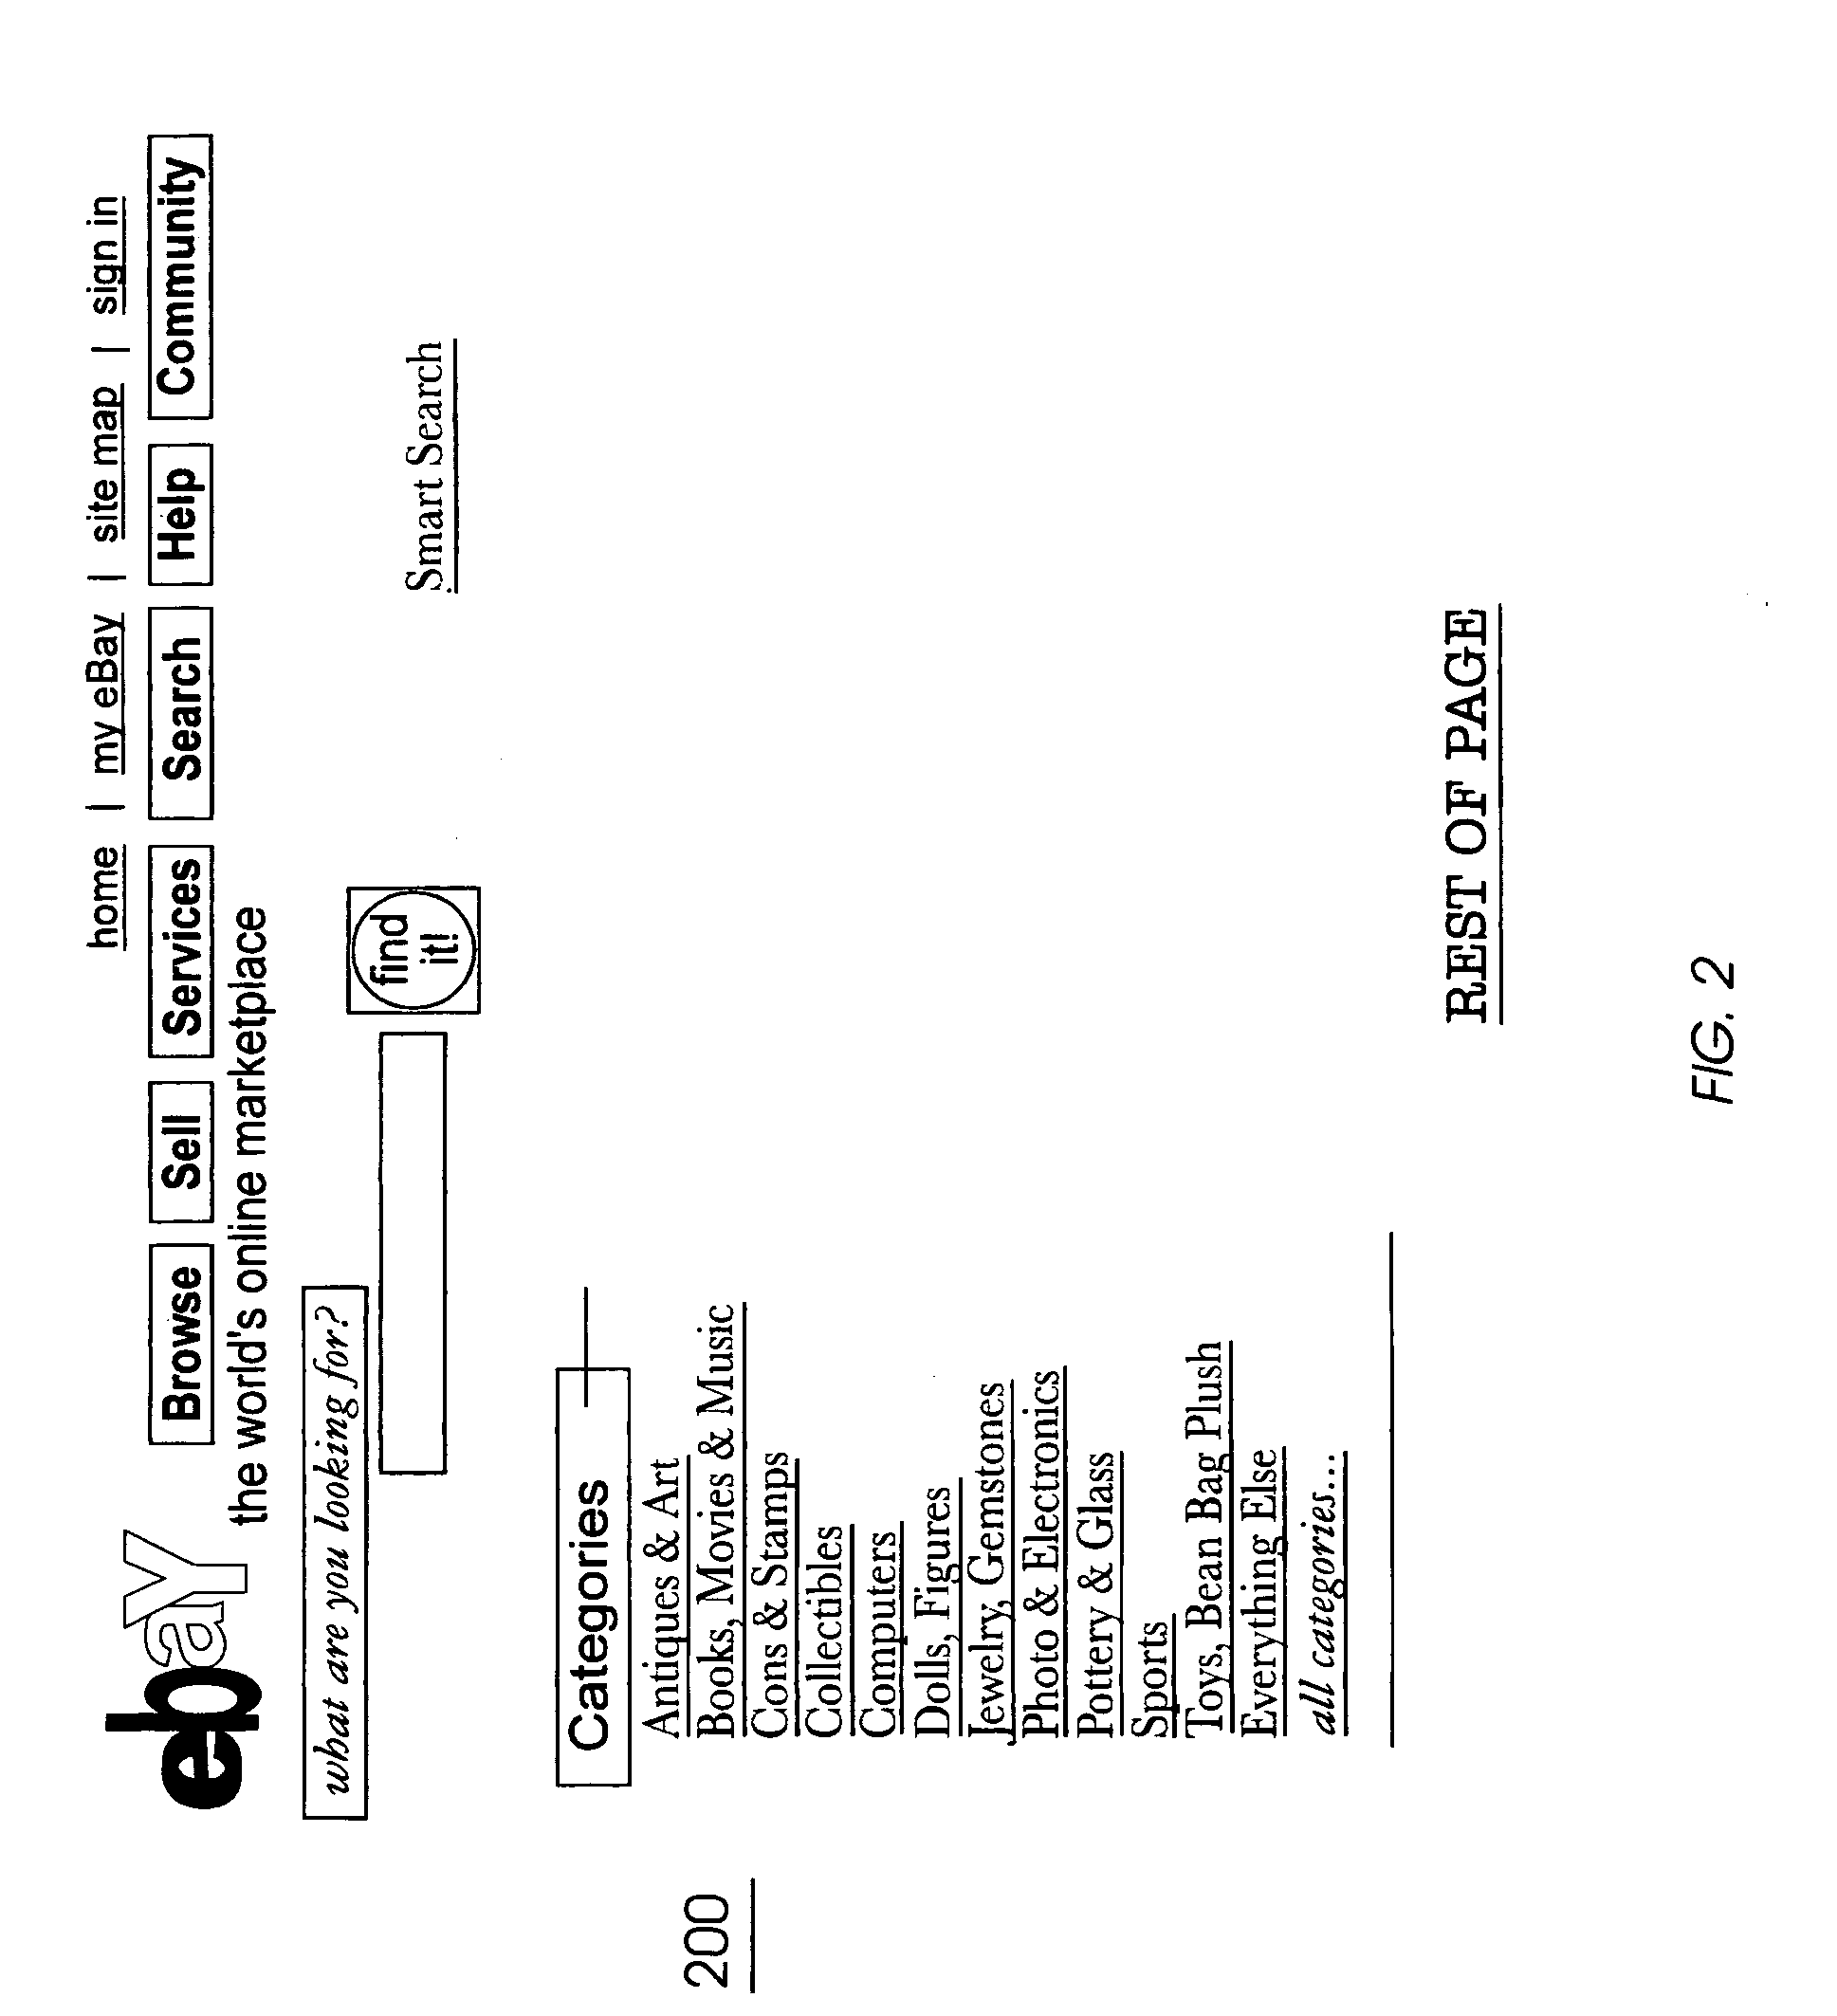 System and method for automatically personalizing web portals and web services based upon usage history